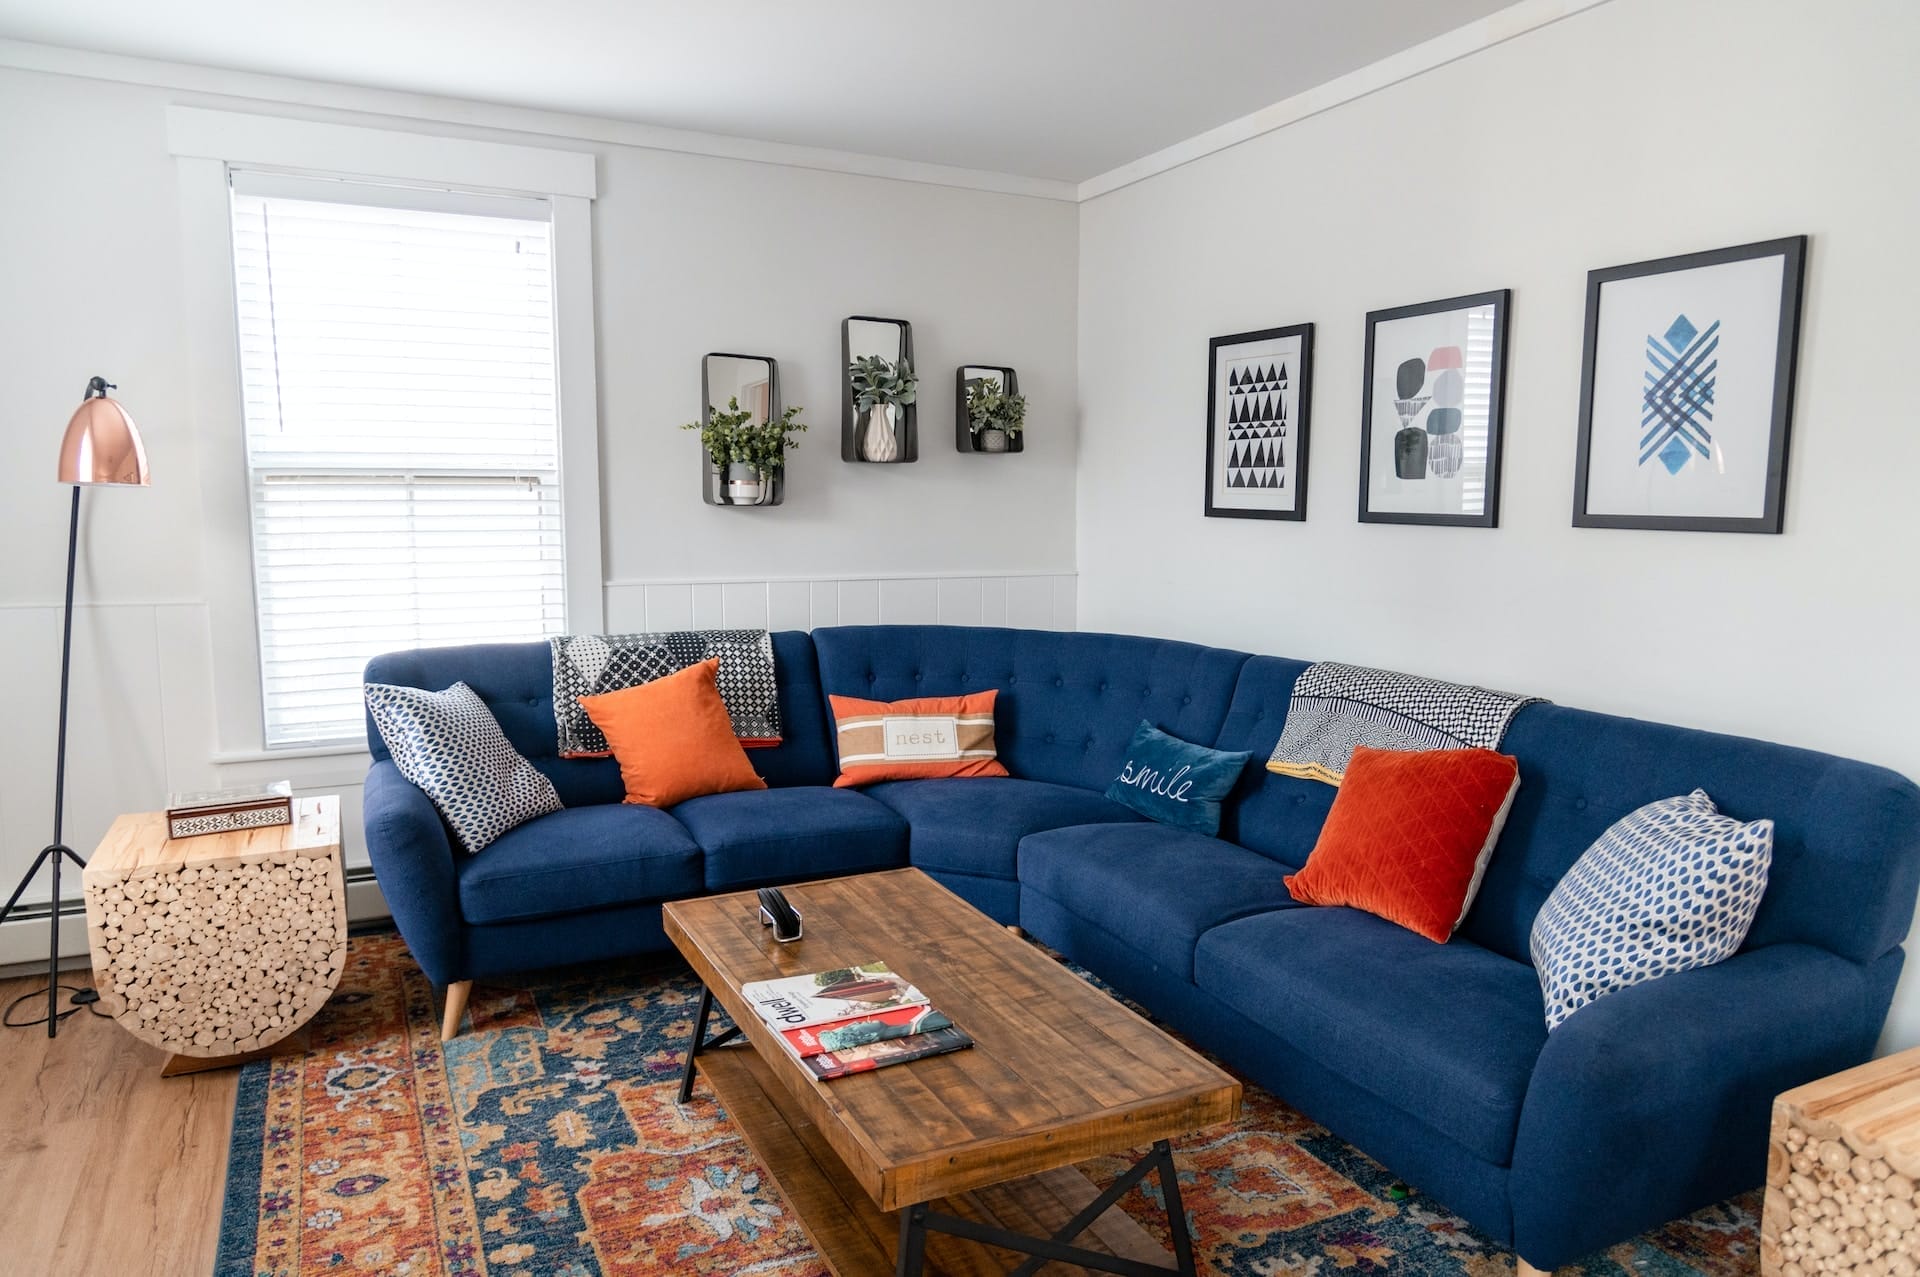 A living room with a blue couch and orange rug perfect for showcasing home decor on a marketing website powered by Webflow.